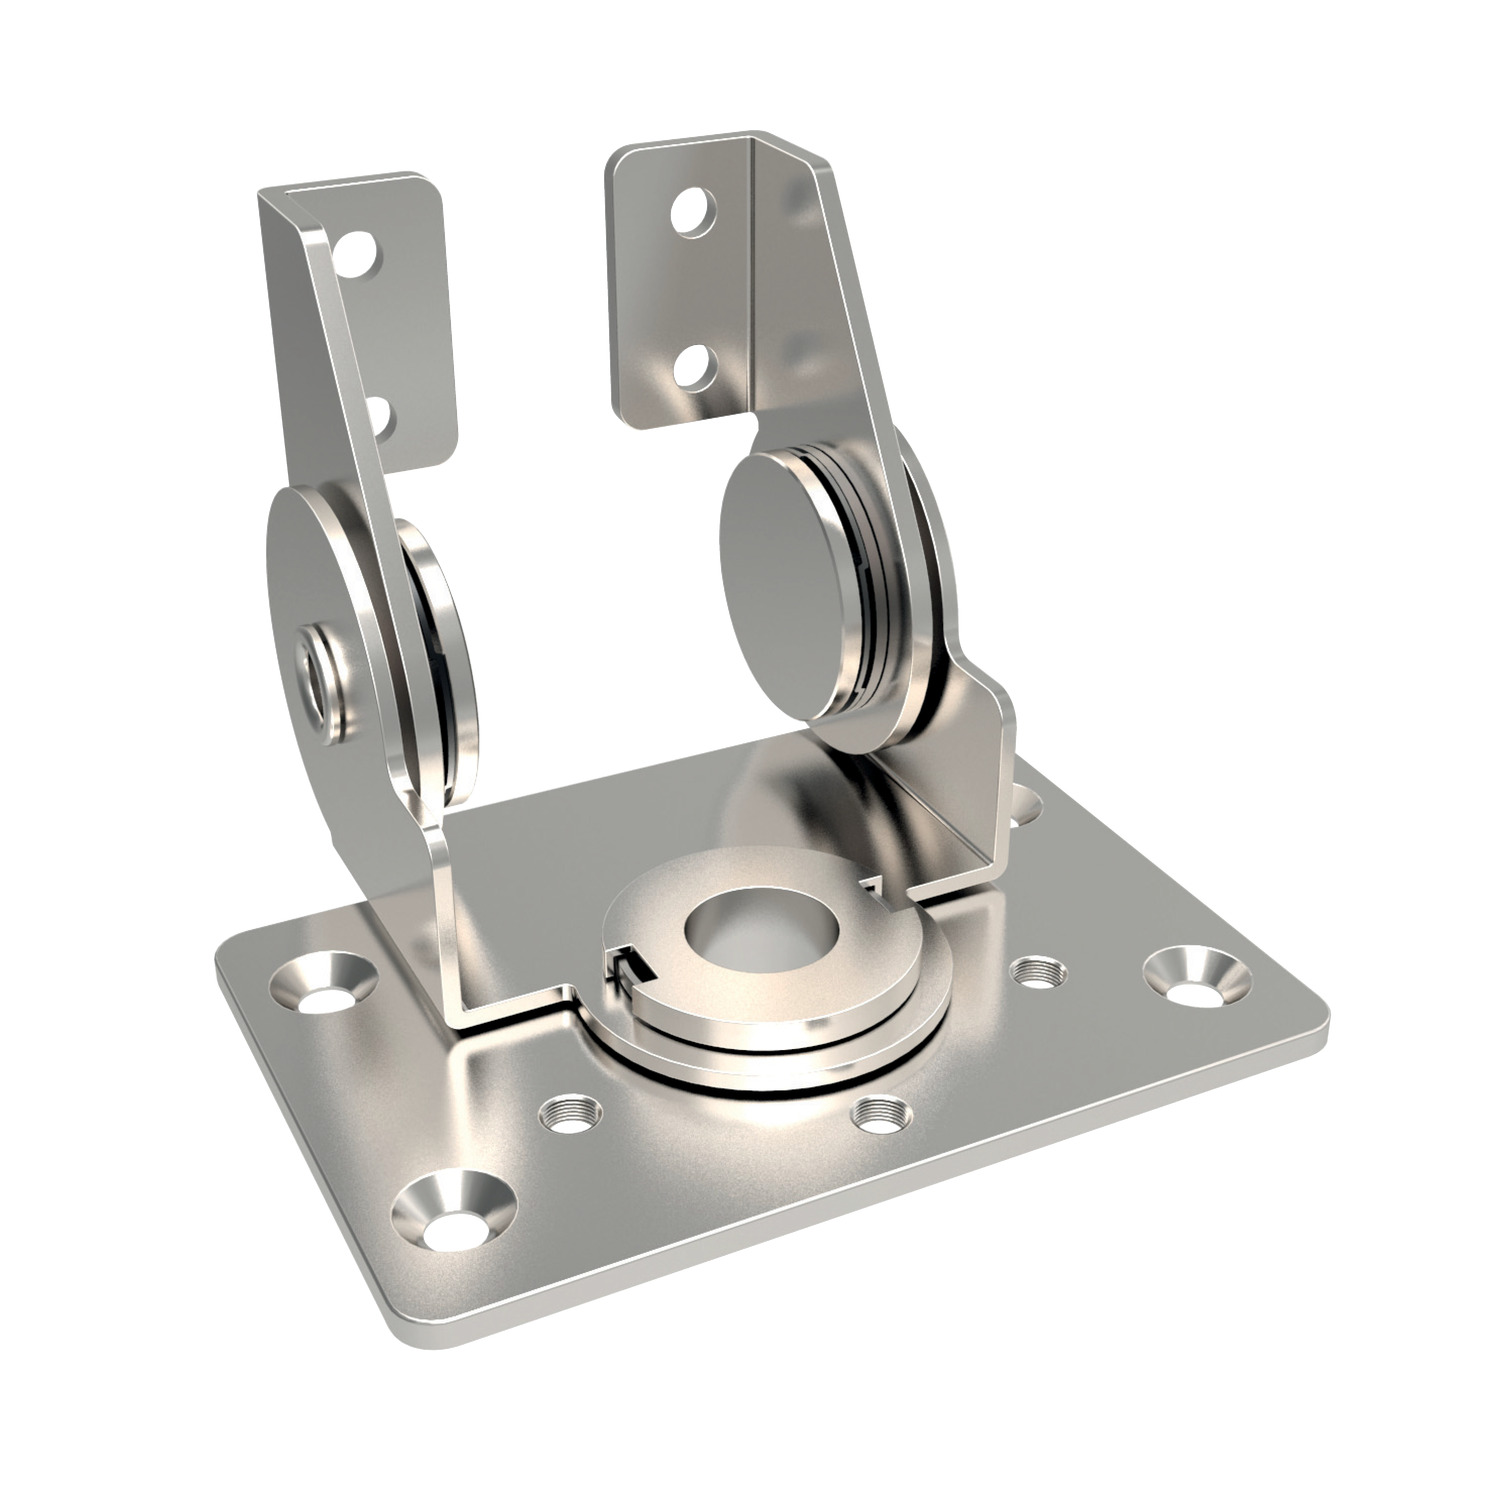 S4032.AC0030 Constant Torque-Dual Axis Friction Hinge Screw mount - Stainless steel - 71,5 Tilting Torque kgf/cm +/-15%